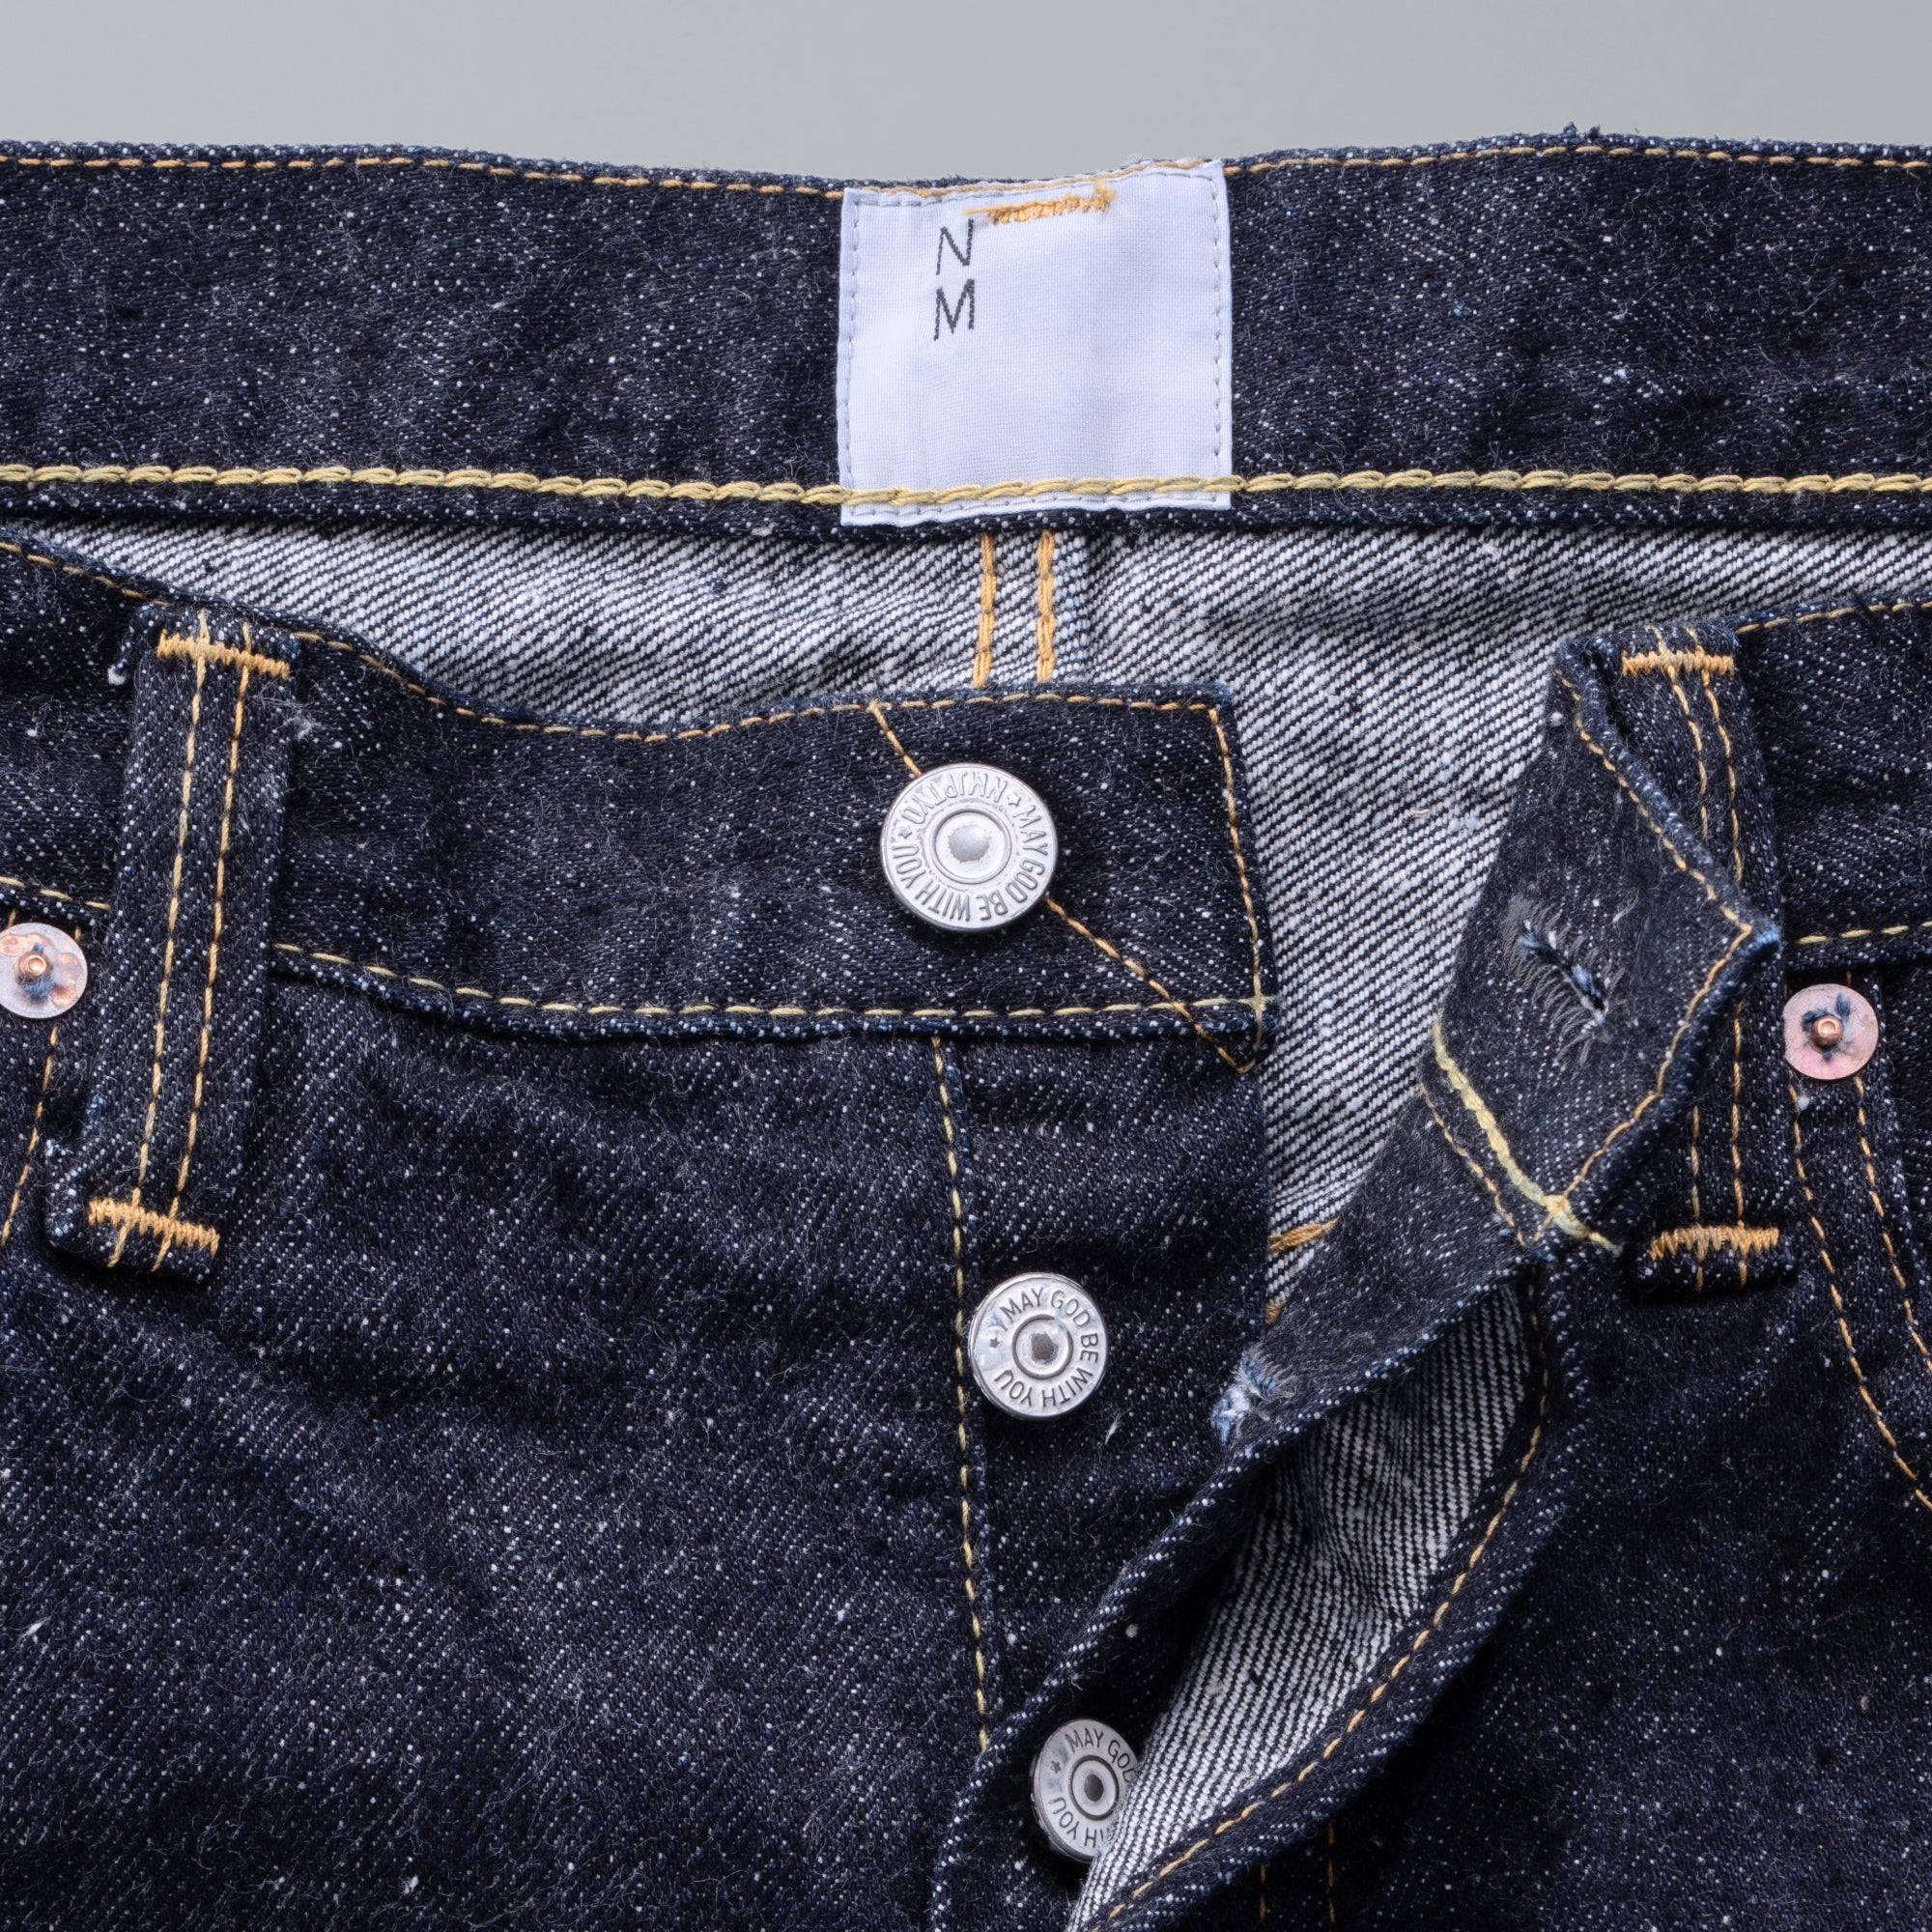 New Manual #017 LV 61's JEANS Limited